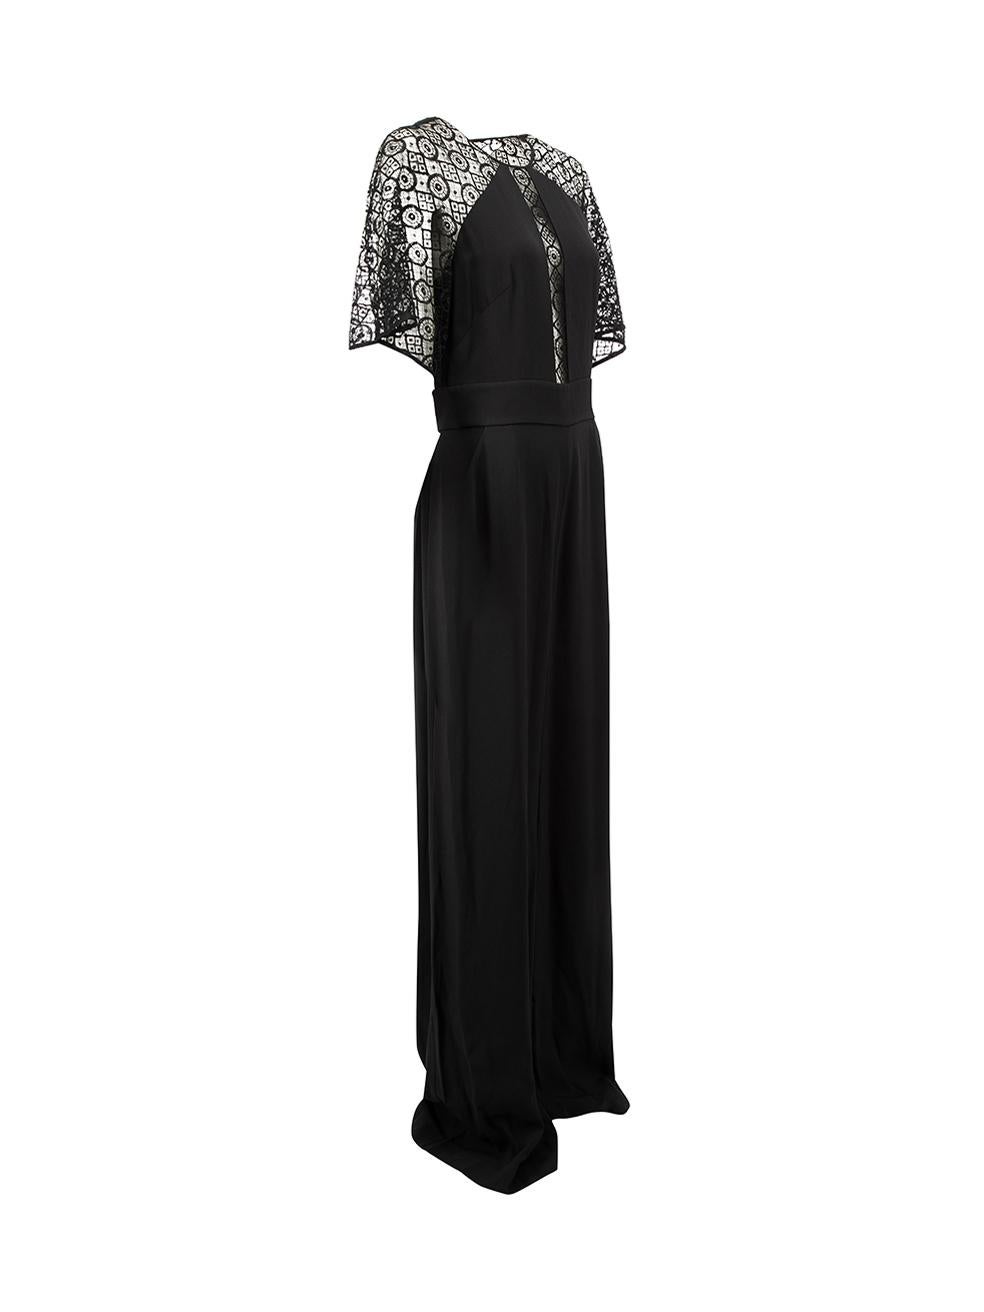 CONDITION is Never worn, with tags. No visible wear to jumpsuit is evident on this new Temperley London designer resale item.



Details


Black

Cotton

Jumpsuit

See through lace panelled on sleeves and neckline

Round and plunge neckline

2x